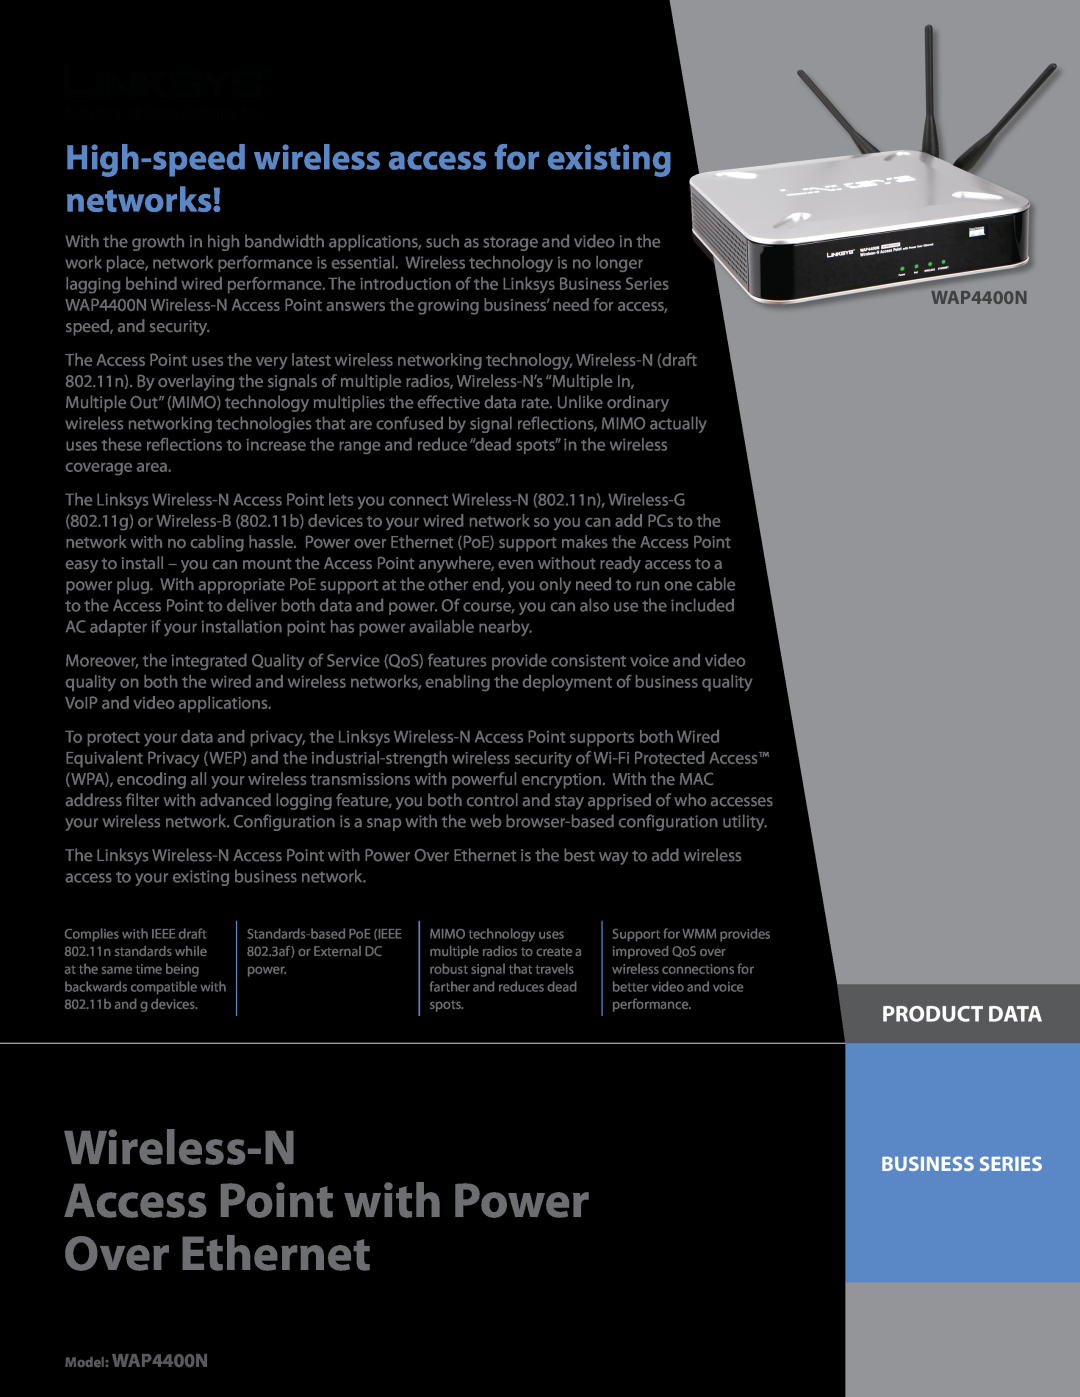 Linksys manual Product Data, Business Series, Wireless-N Access Point with Power Over Ethernet, Model WAP4400N 